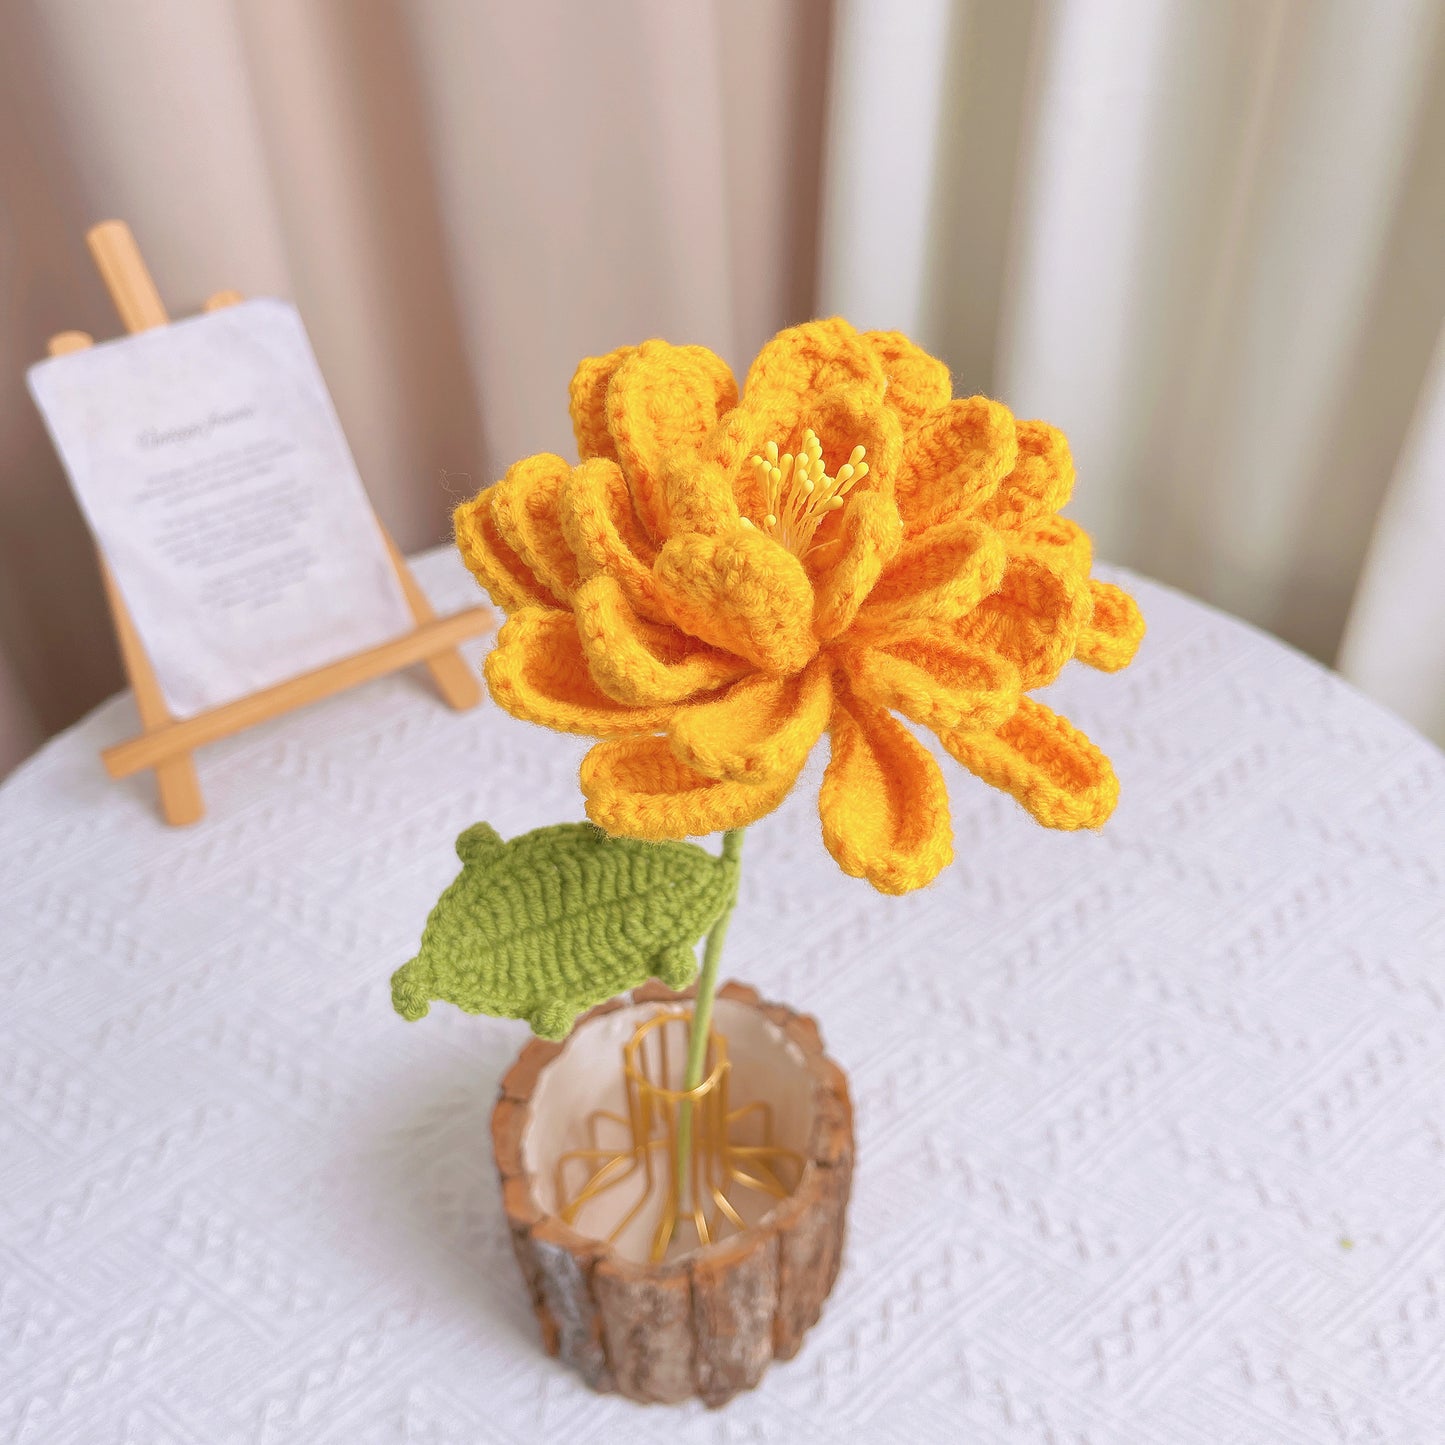 October Birth Month Marigold Bouquet - Hand-Crocheted Single Stem Birthday Flower Arrangement with Festive Wrapping